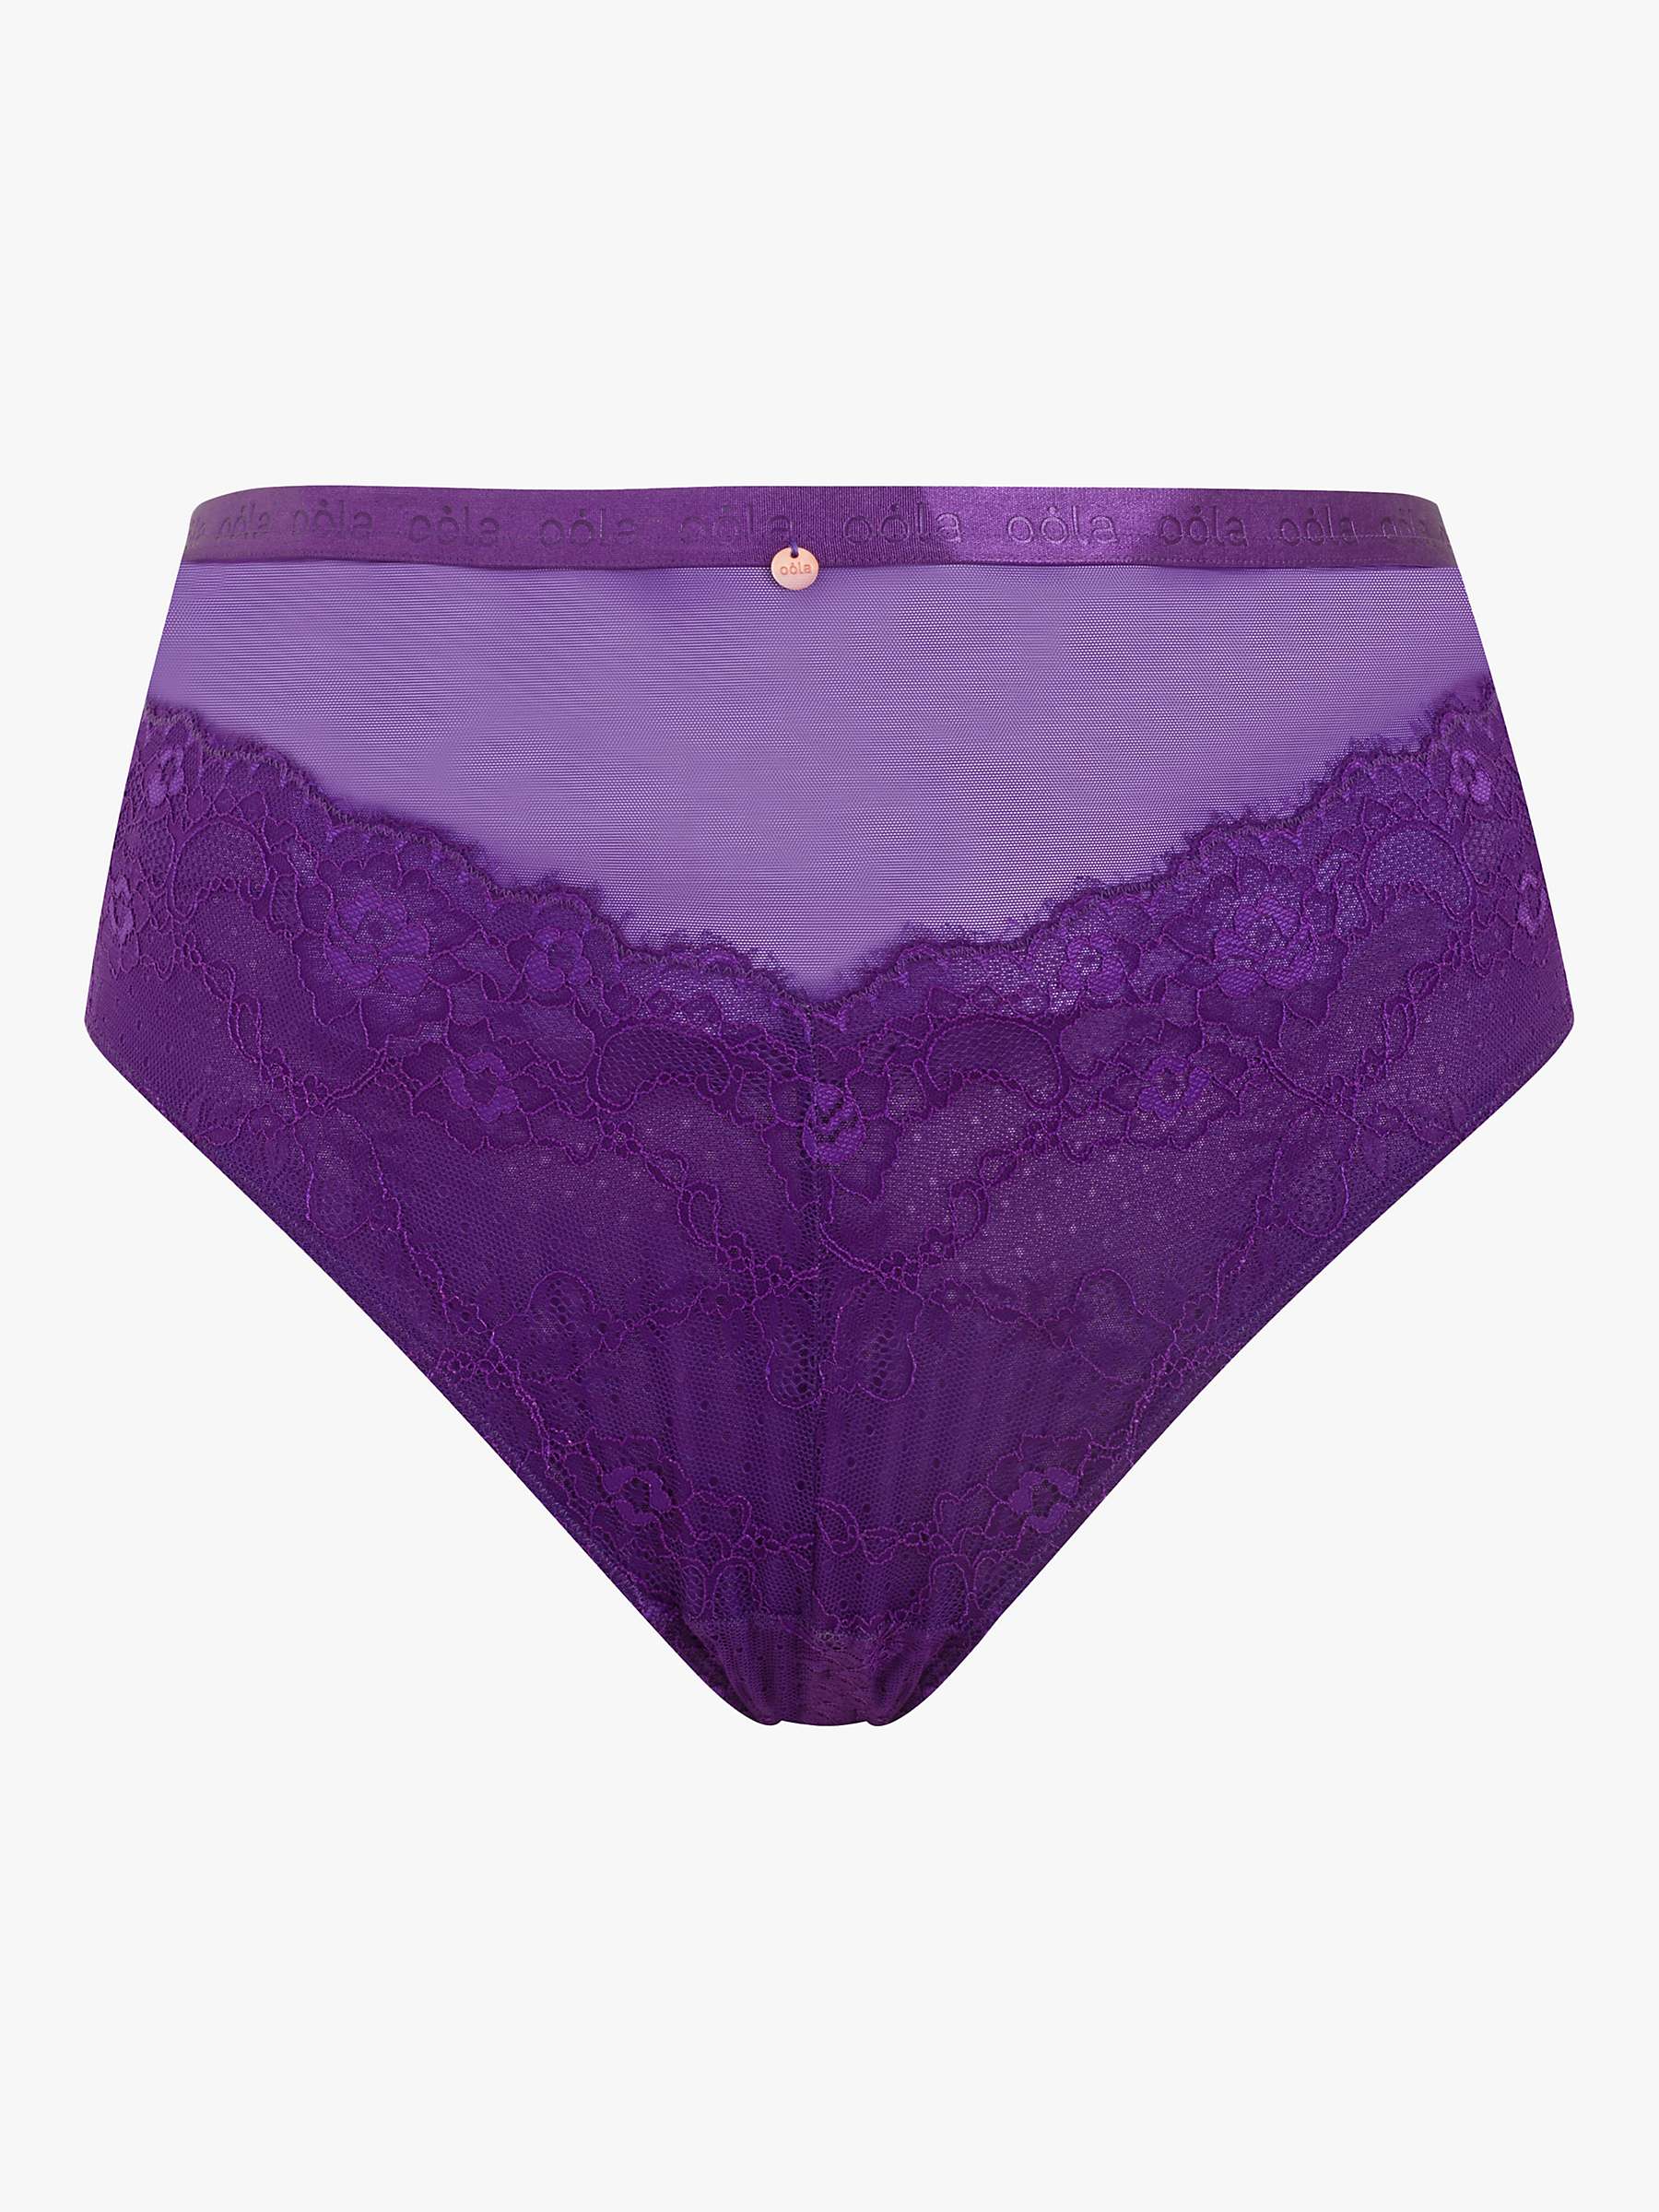 Buy Oola Lingerie Lace and Logo High Waist Knickers Online at johnlewis.com